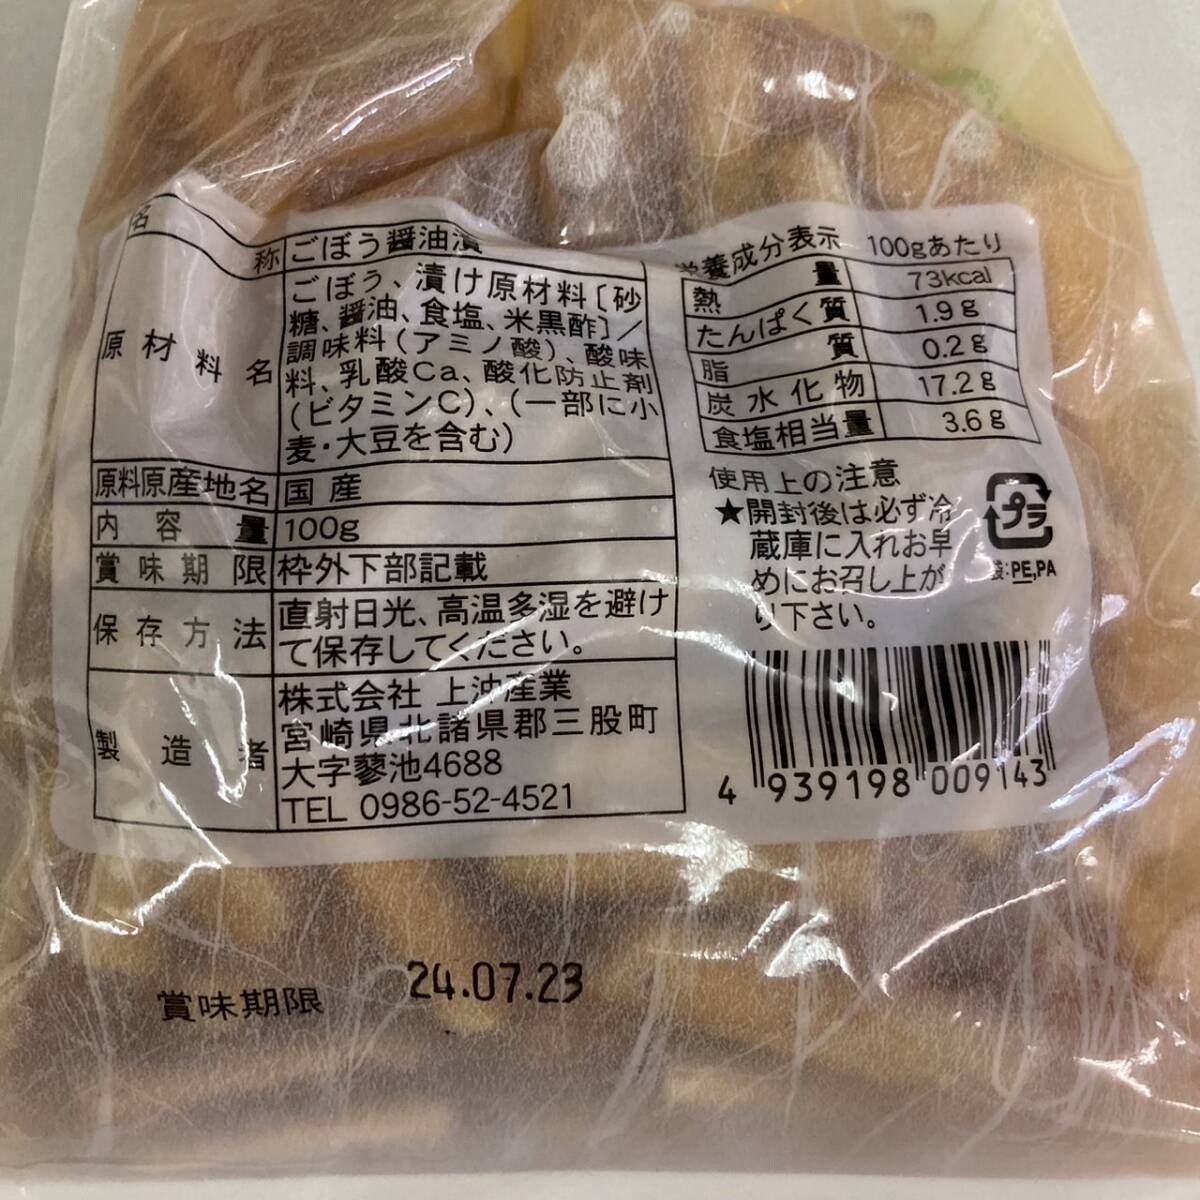 { trial set } gobou oil .100g 3 sack free shipping soy sauce . gobou Miyazaki prefecture production * for the first time purchased . person only limitation * trial domestic production tsukemono pickles thing production goods 